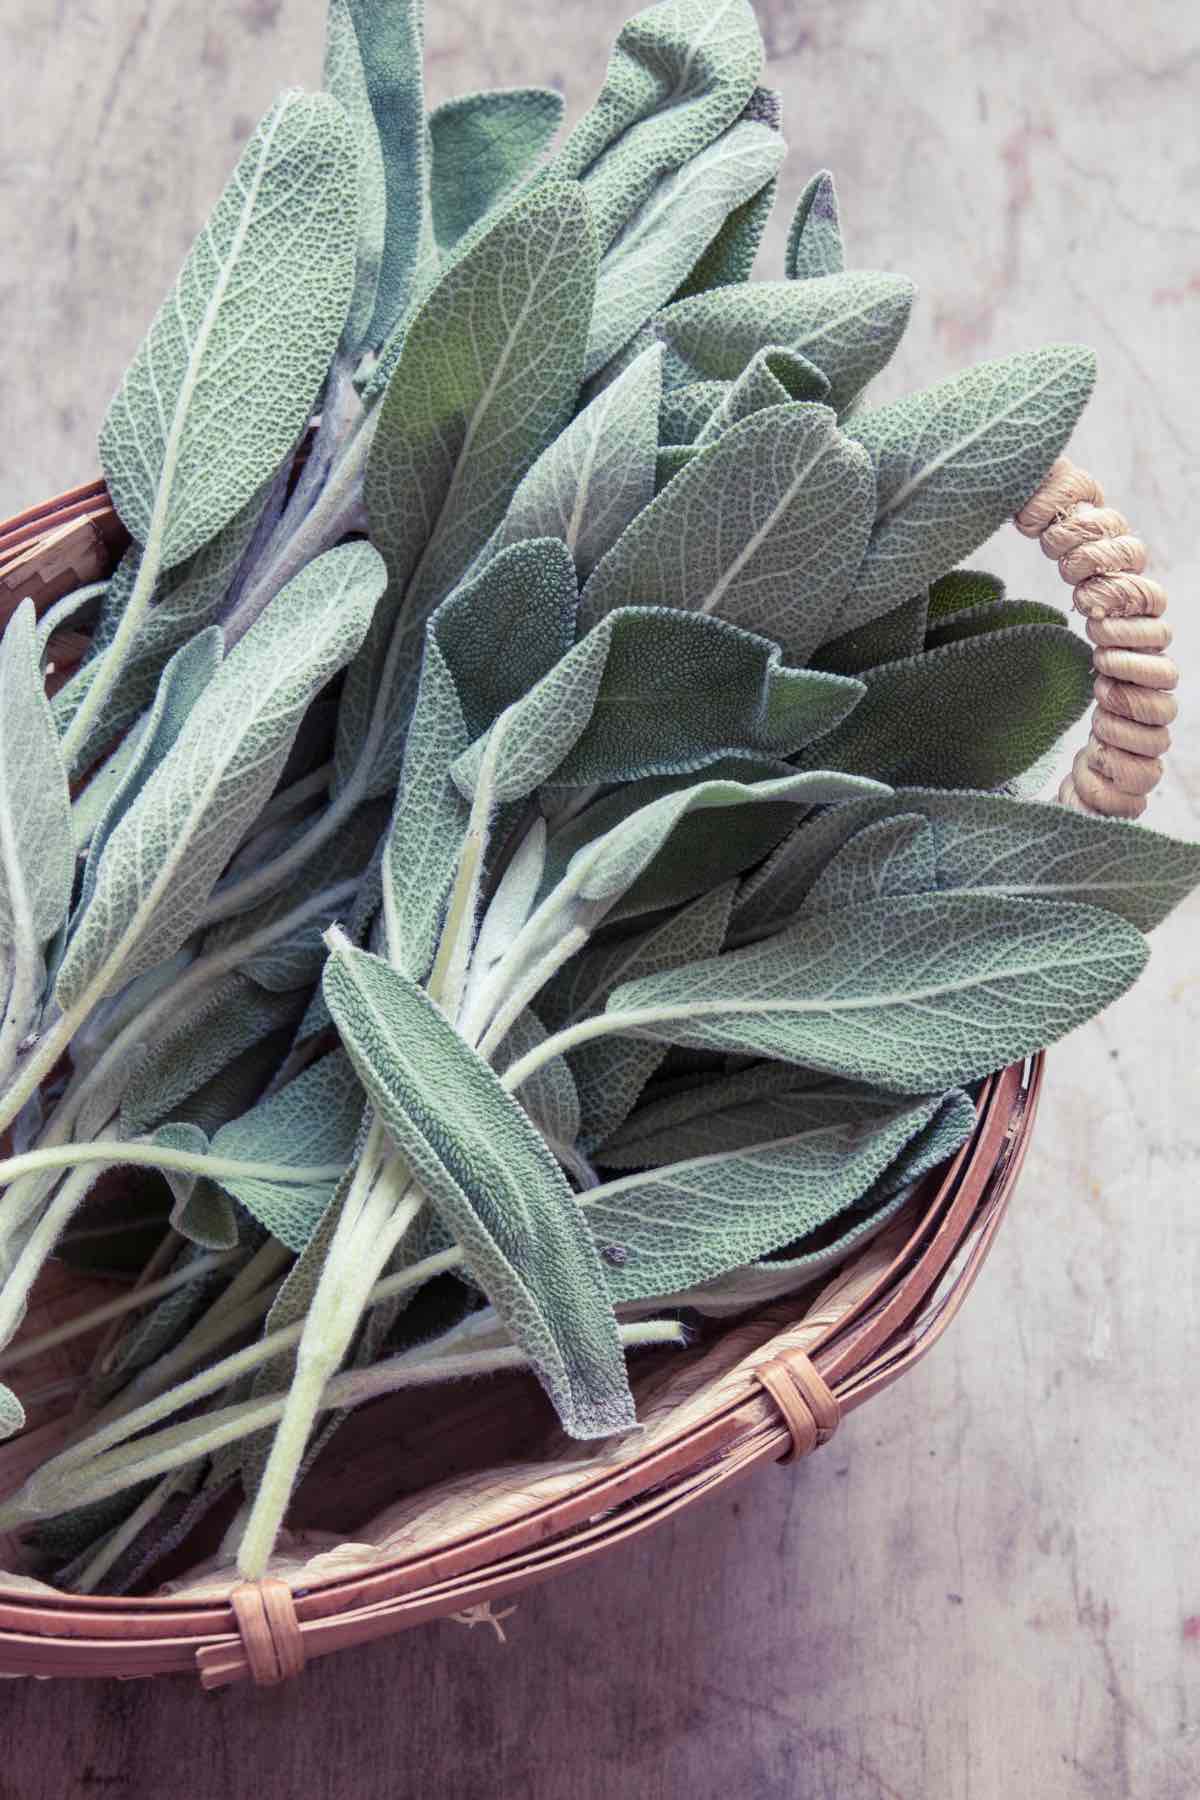 Looking for Sage Substitutes? We’ll run the gamut for you on some spices/herbs you may have heard or thought of, and others not so much. What are the best sage alternatives to flavor your dish? Can you name the Canadian version of sage? Read on and find out!